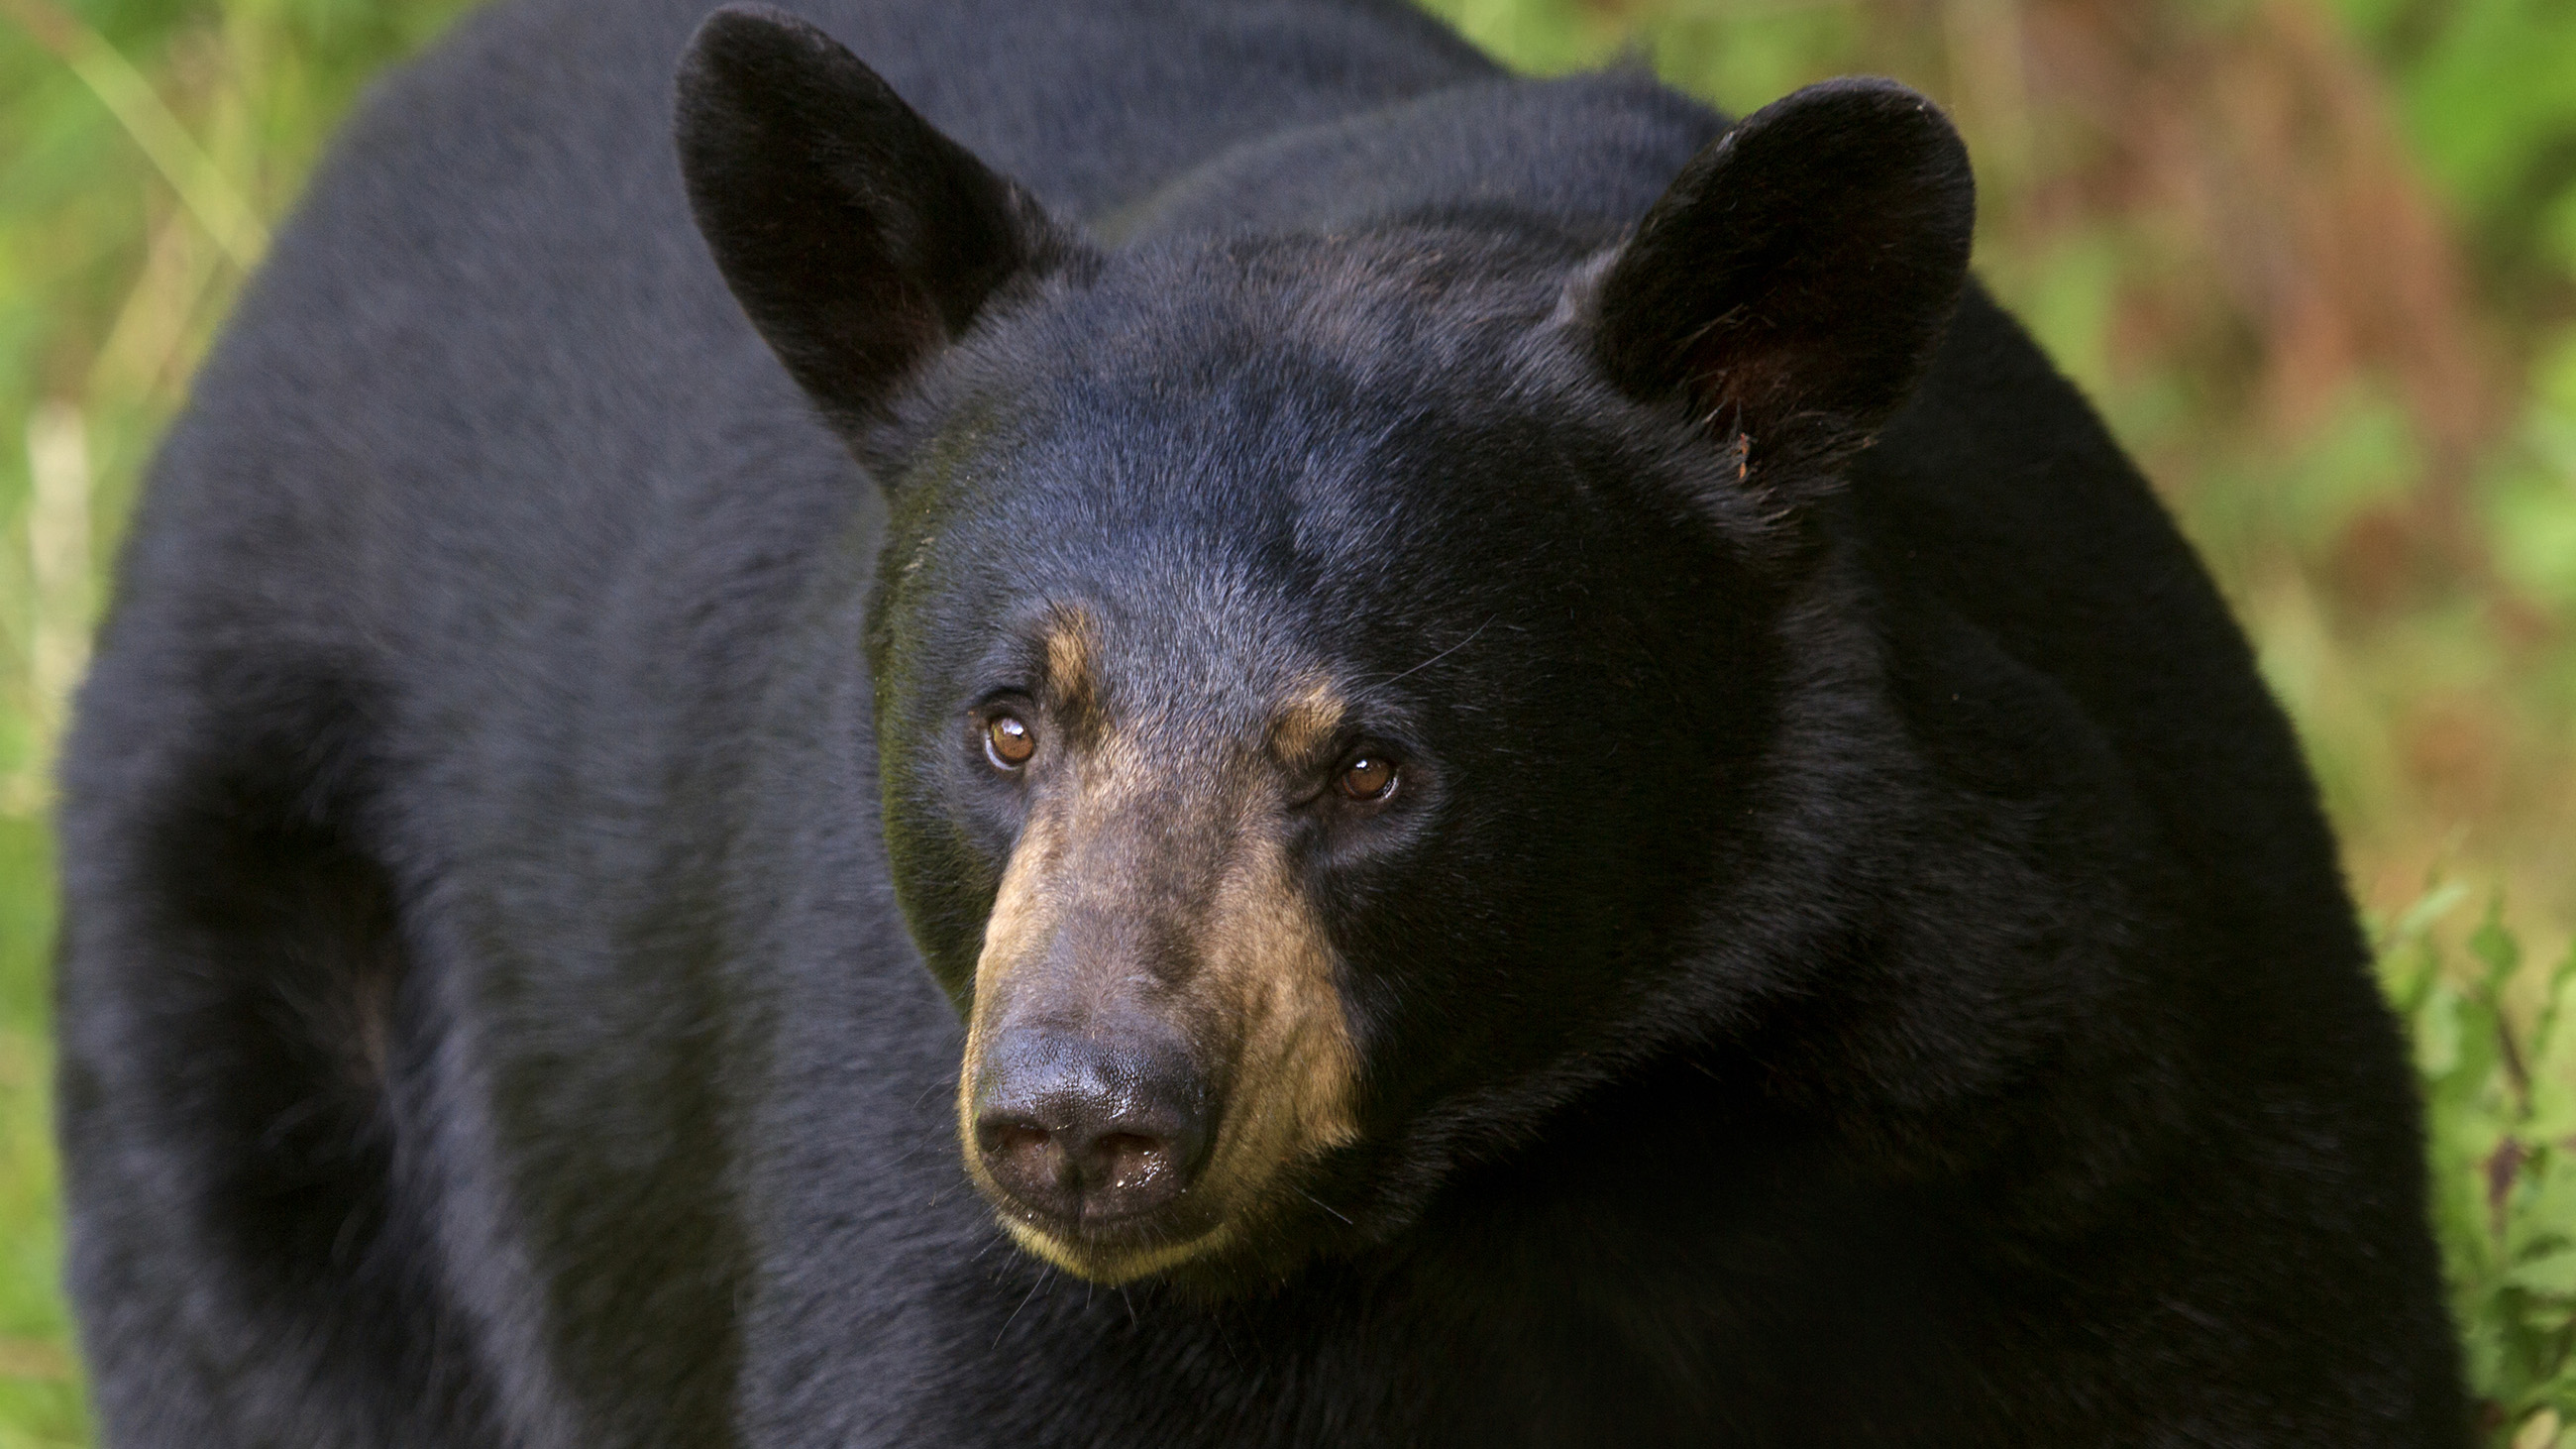 Data is helping bears and humans to more peacefully coexist.